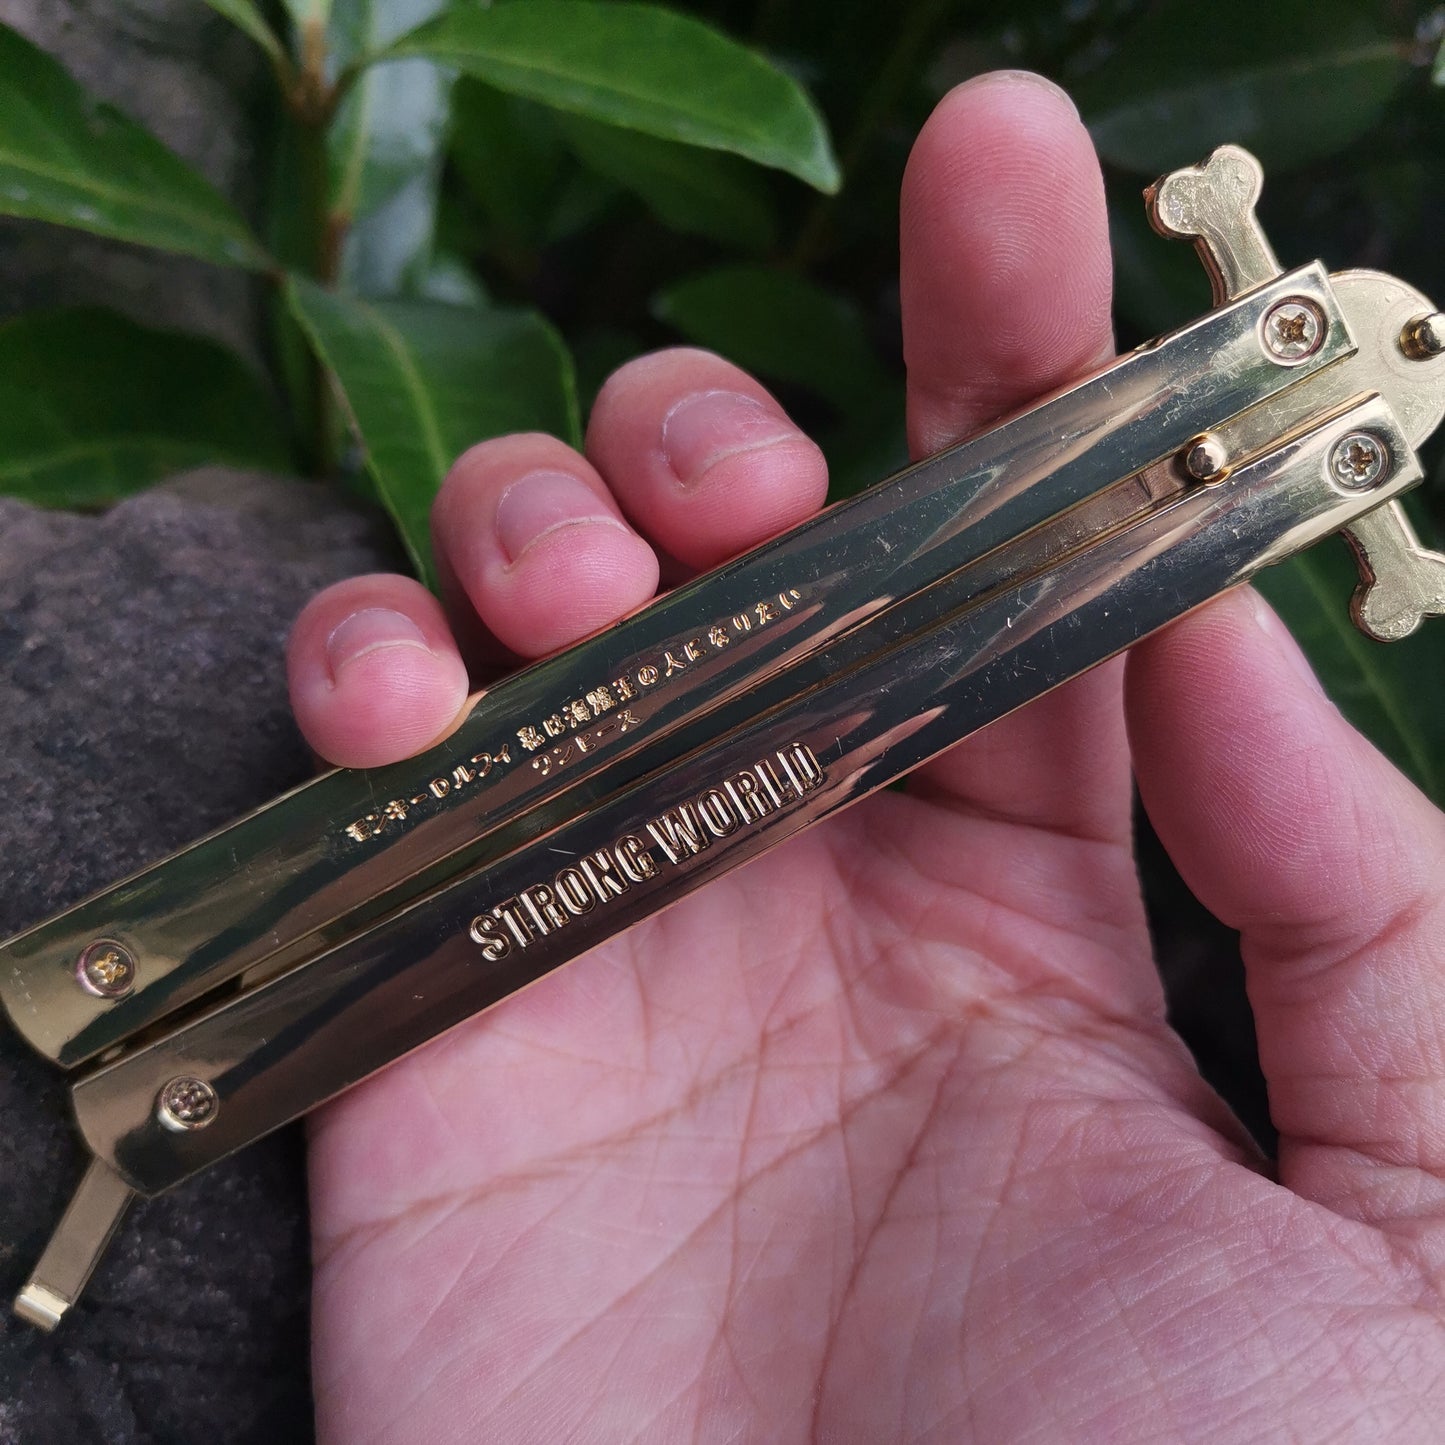 Anime Fandom Alloy Balisong Trainer for Gift